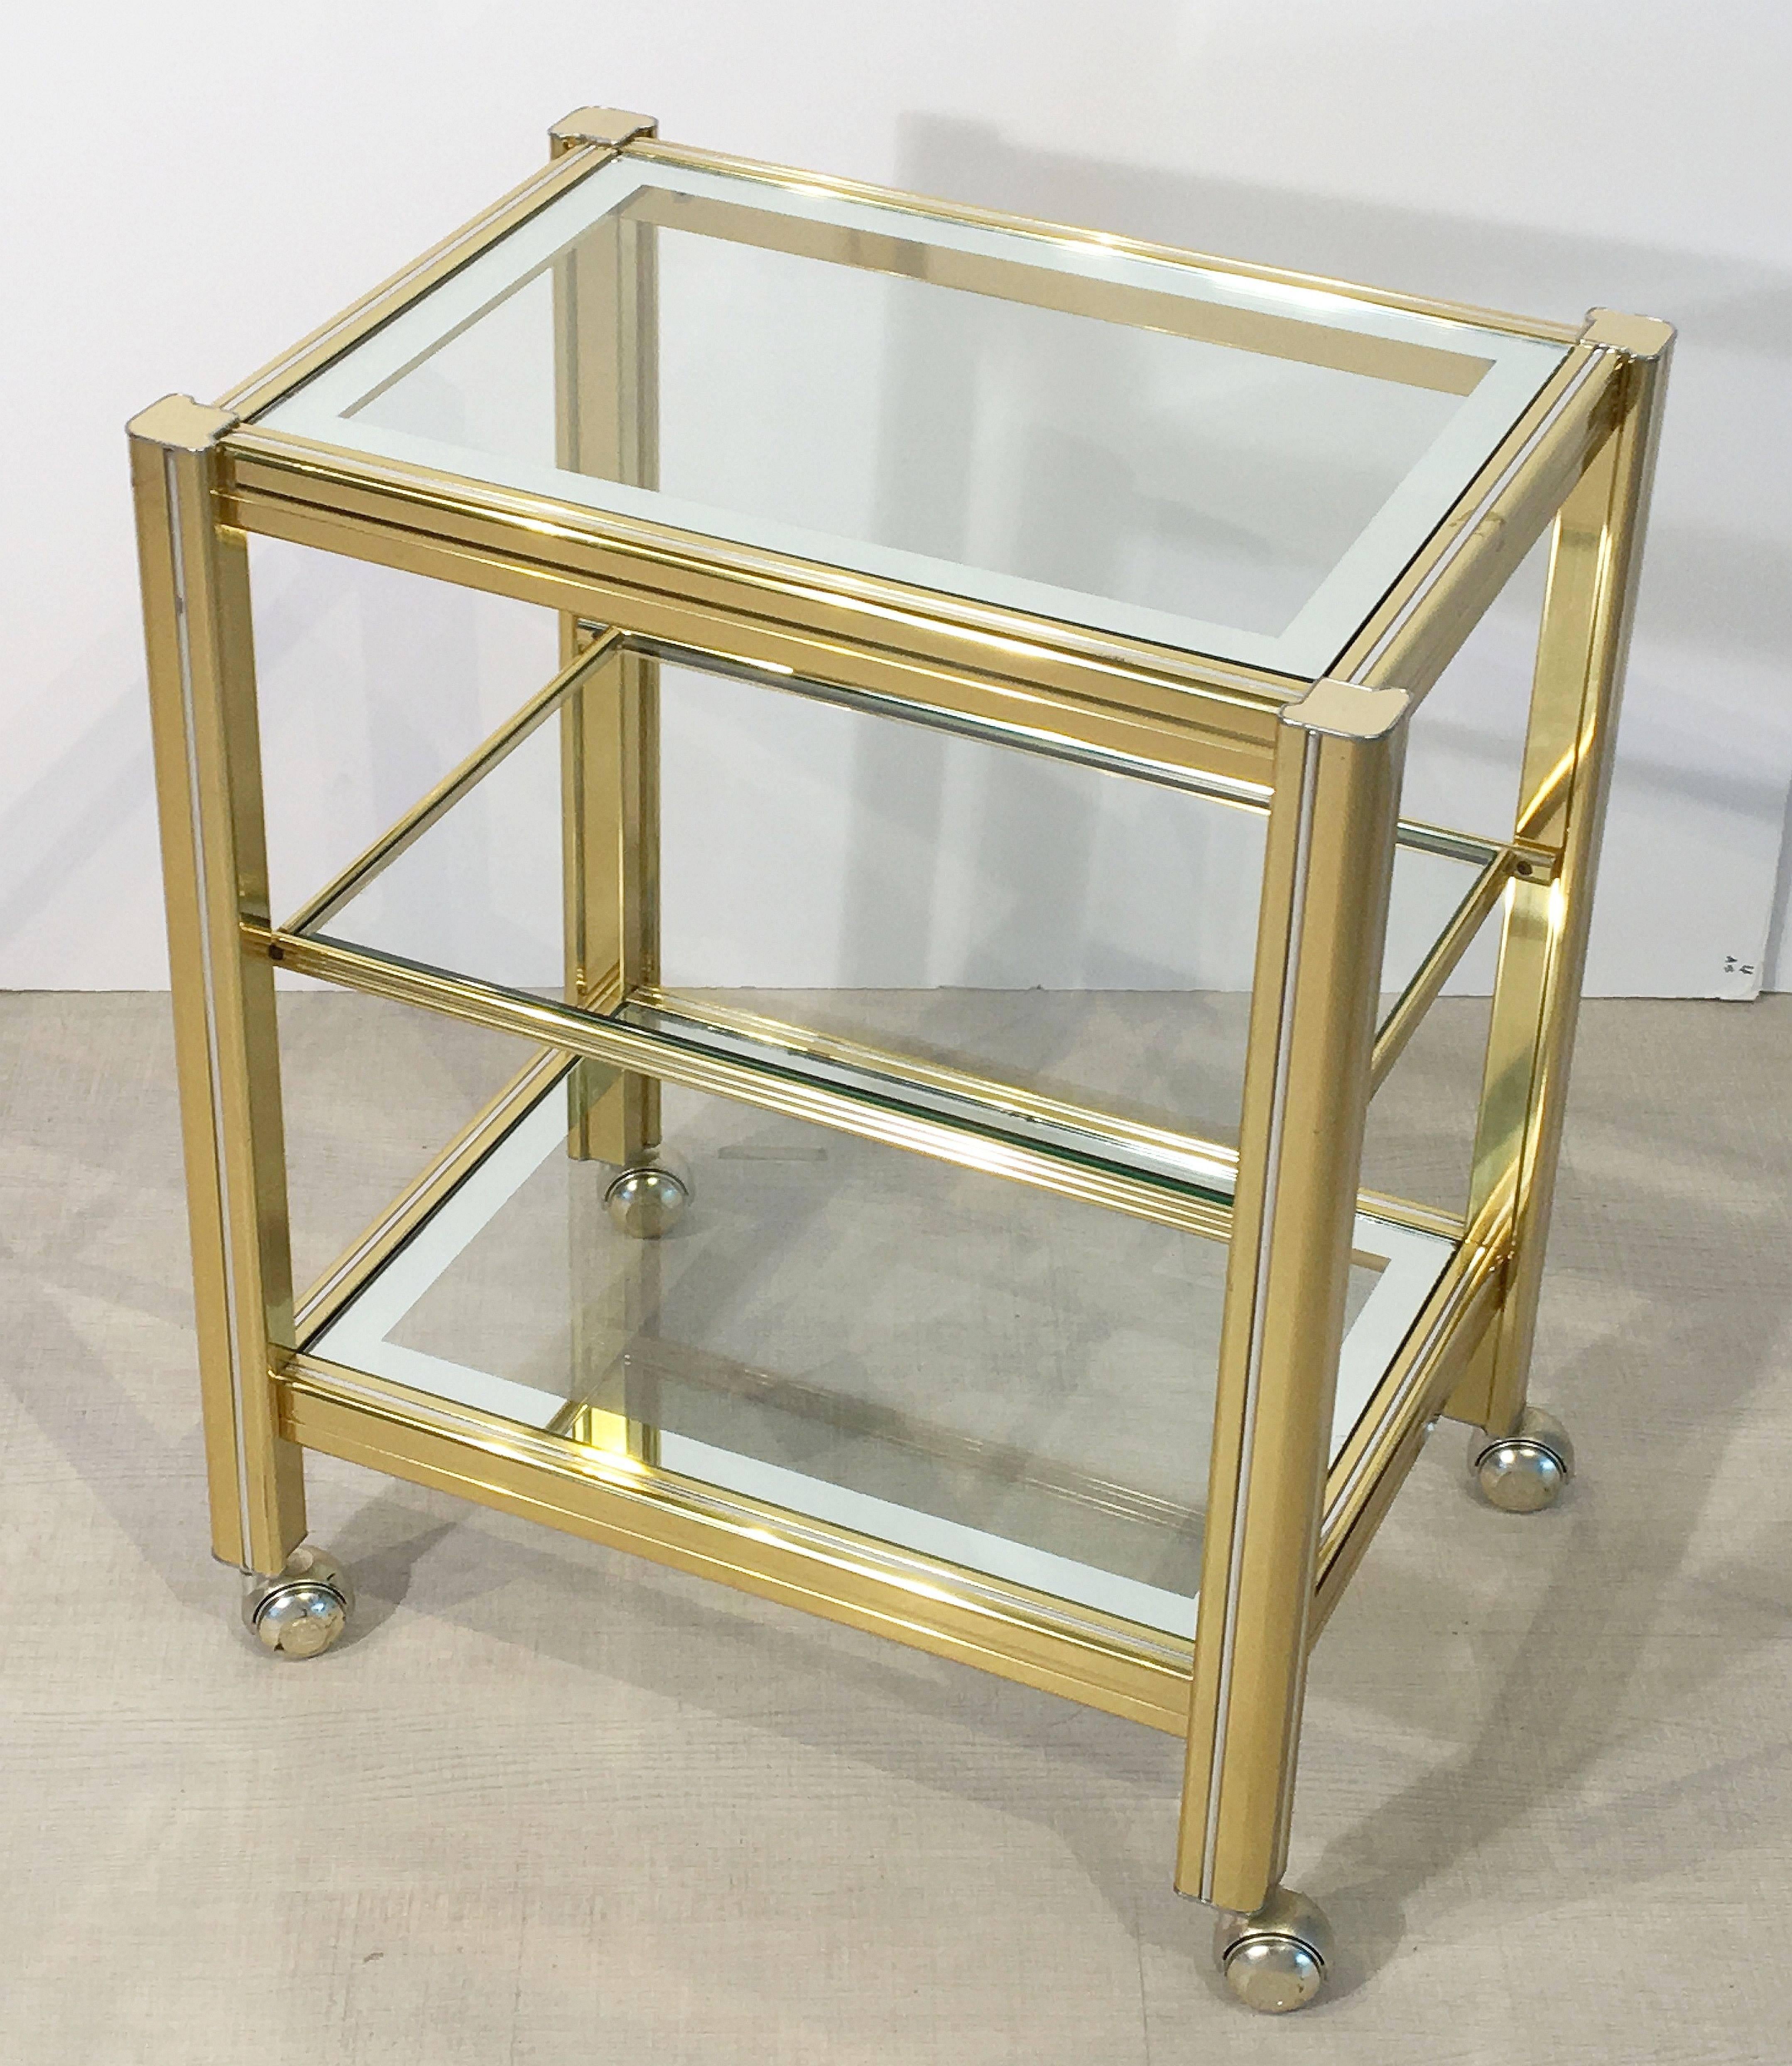 A fine Italian drinks trolley or bar cart, featuring three tiers of rectangular glass set into a stylish brass and chrome frame on rolling casters.

Makes a great side or occasional table.